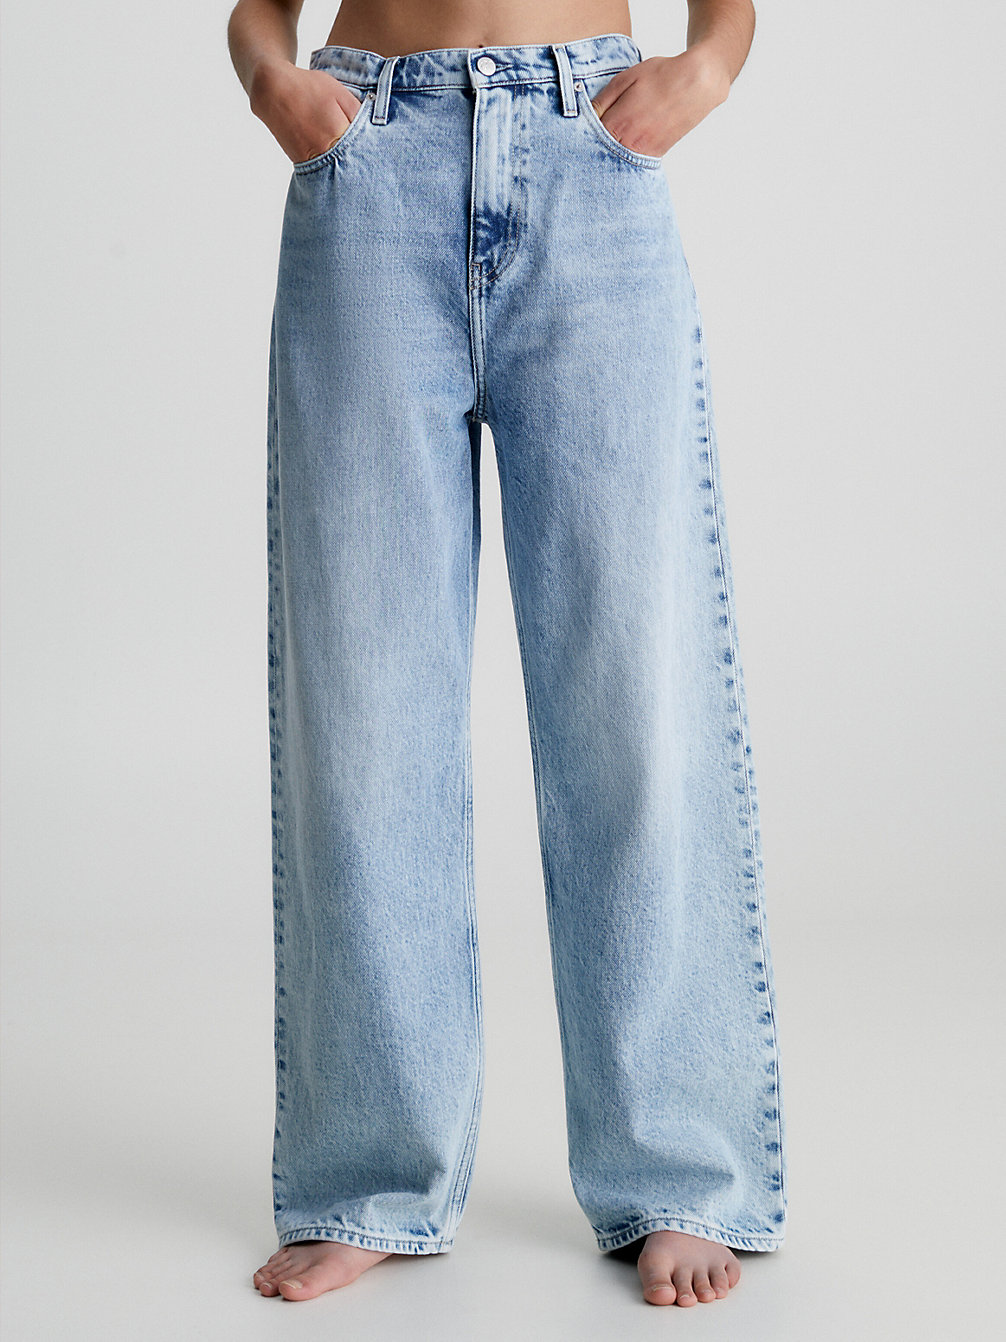 DENIM LIGHT > Jeansy High Rise Relaxed > undefined Kobiety - Calvin Klein